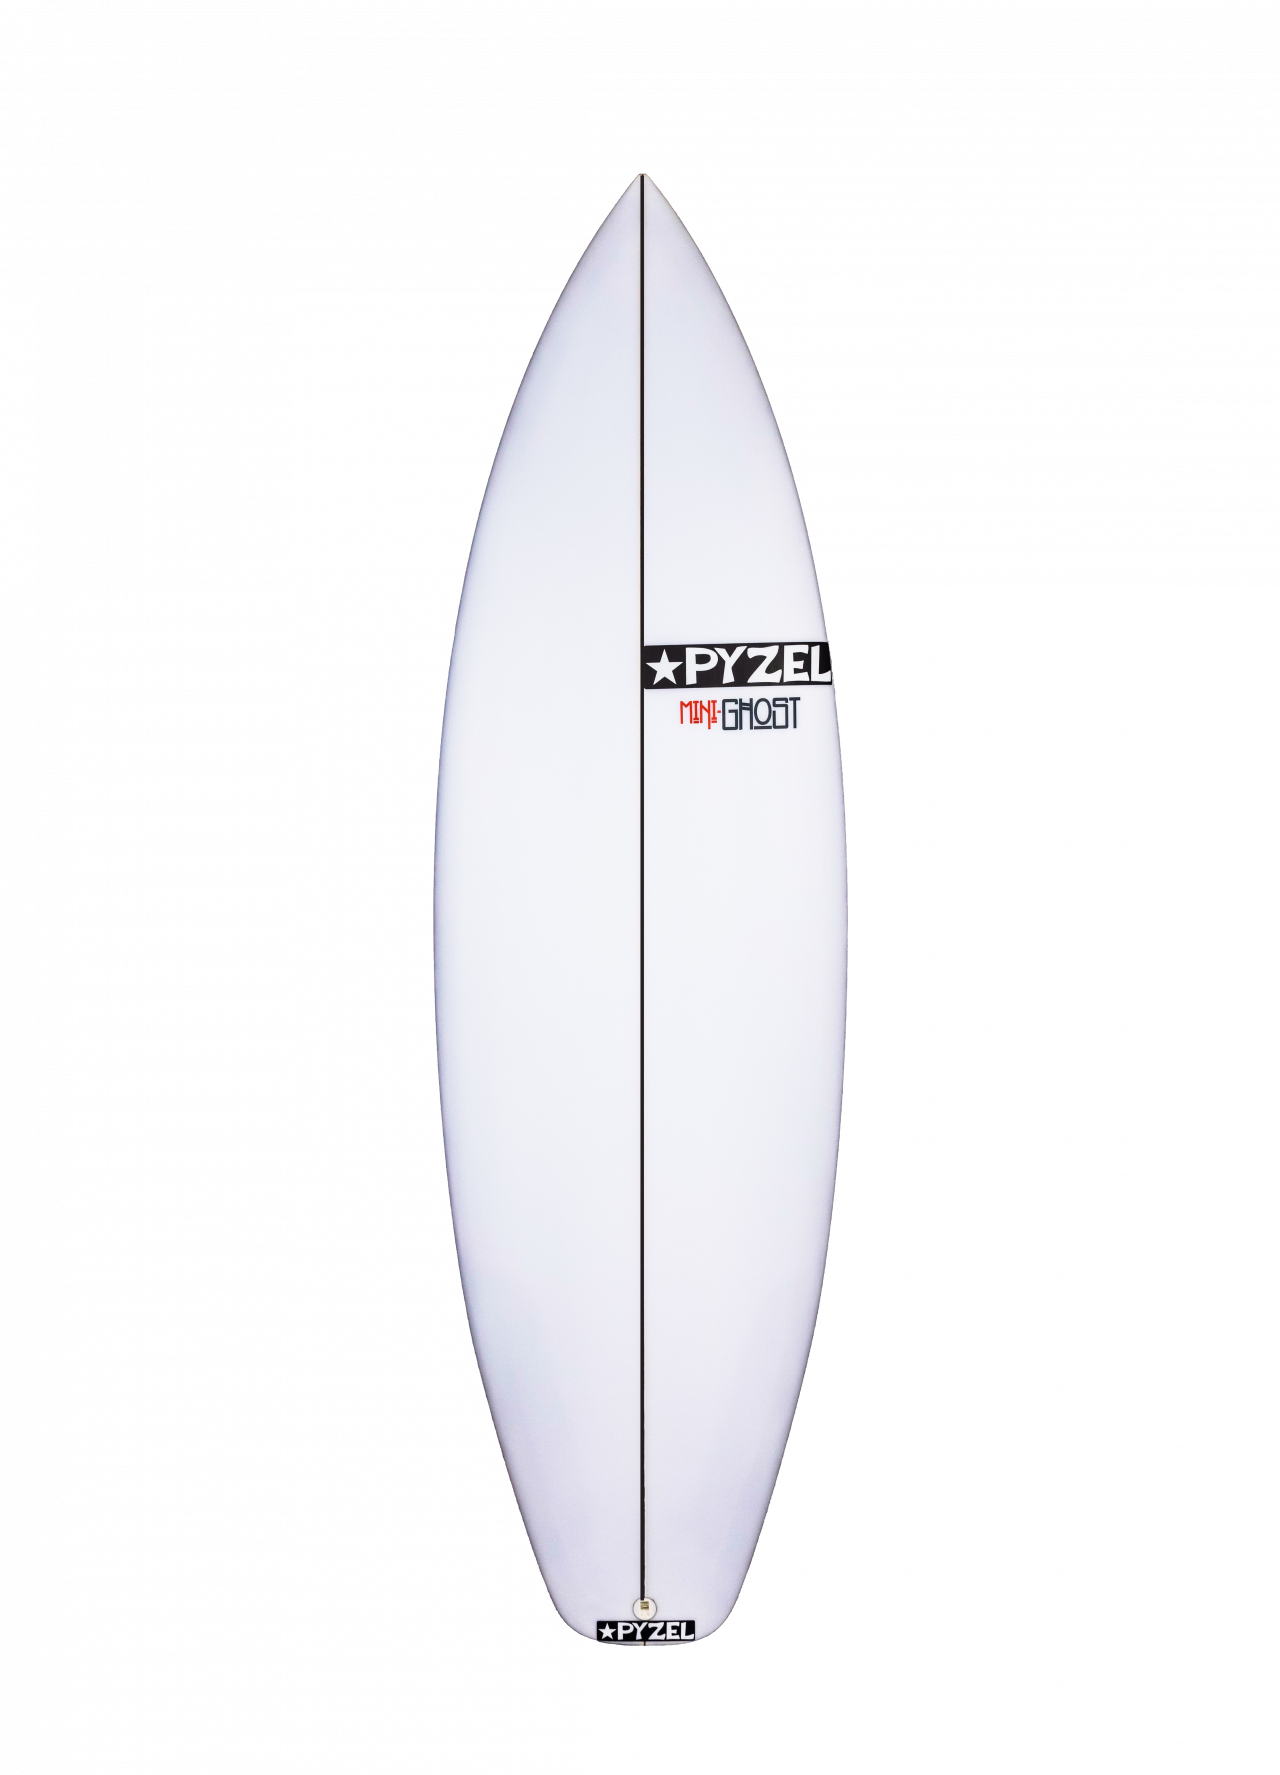 PYZEL 5'11 MINI GHOST FUTURES